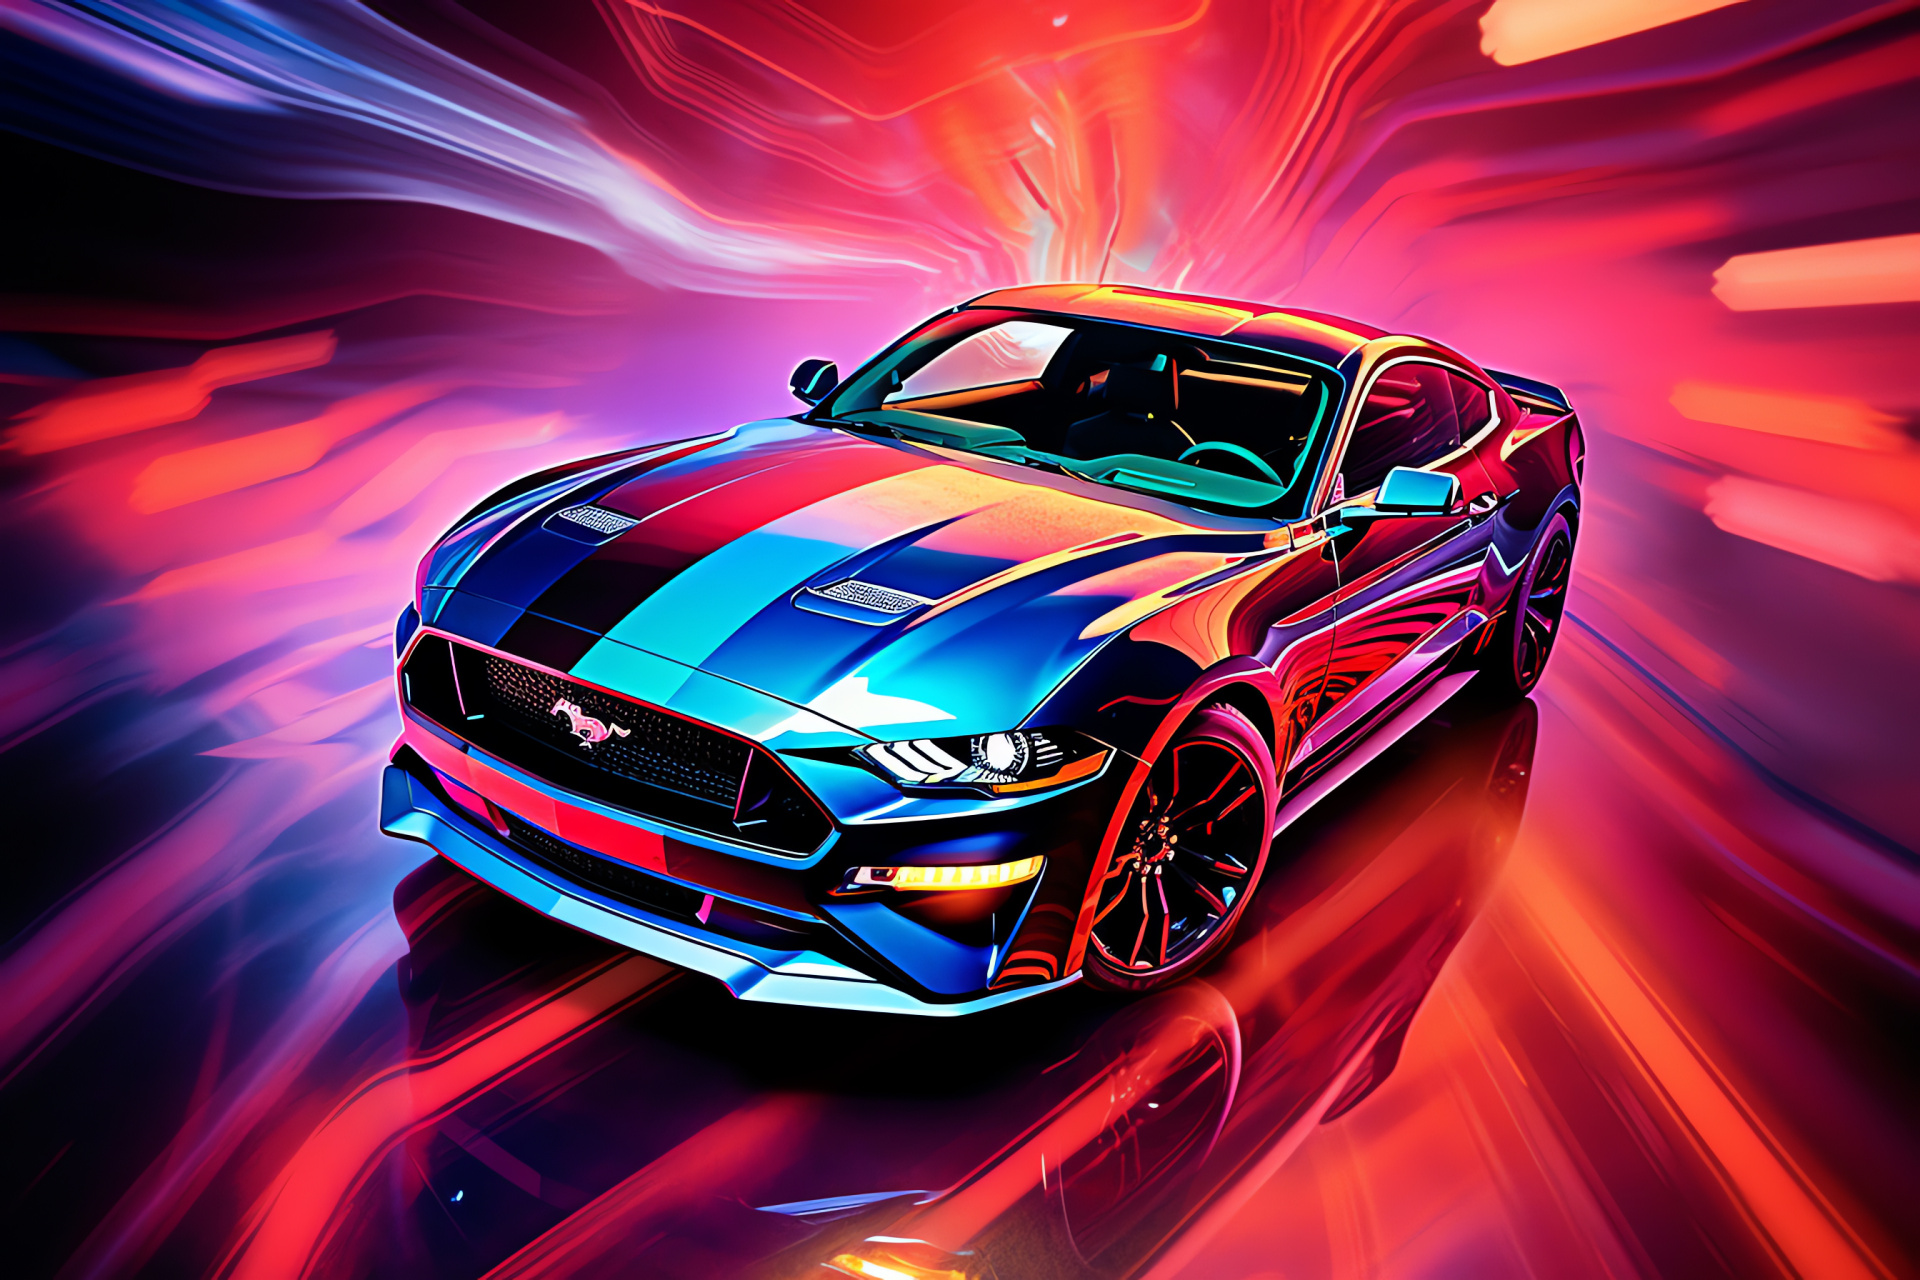 Mustang high ground view, Dynamic color play, Striking car posture, Lively backdrop Mustang, Automotive character, HD Desktop Wallpaper